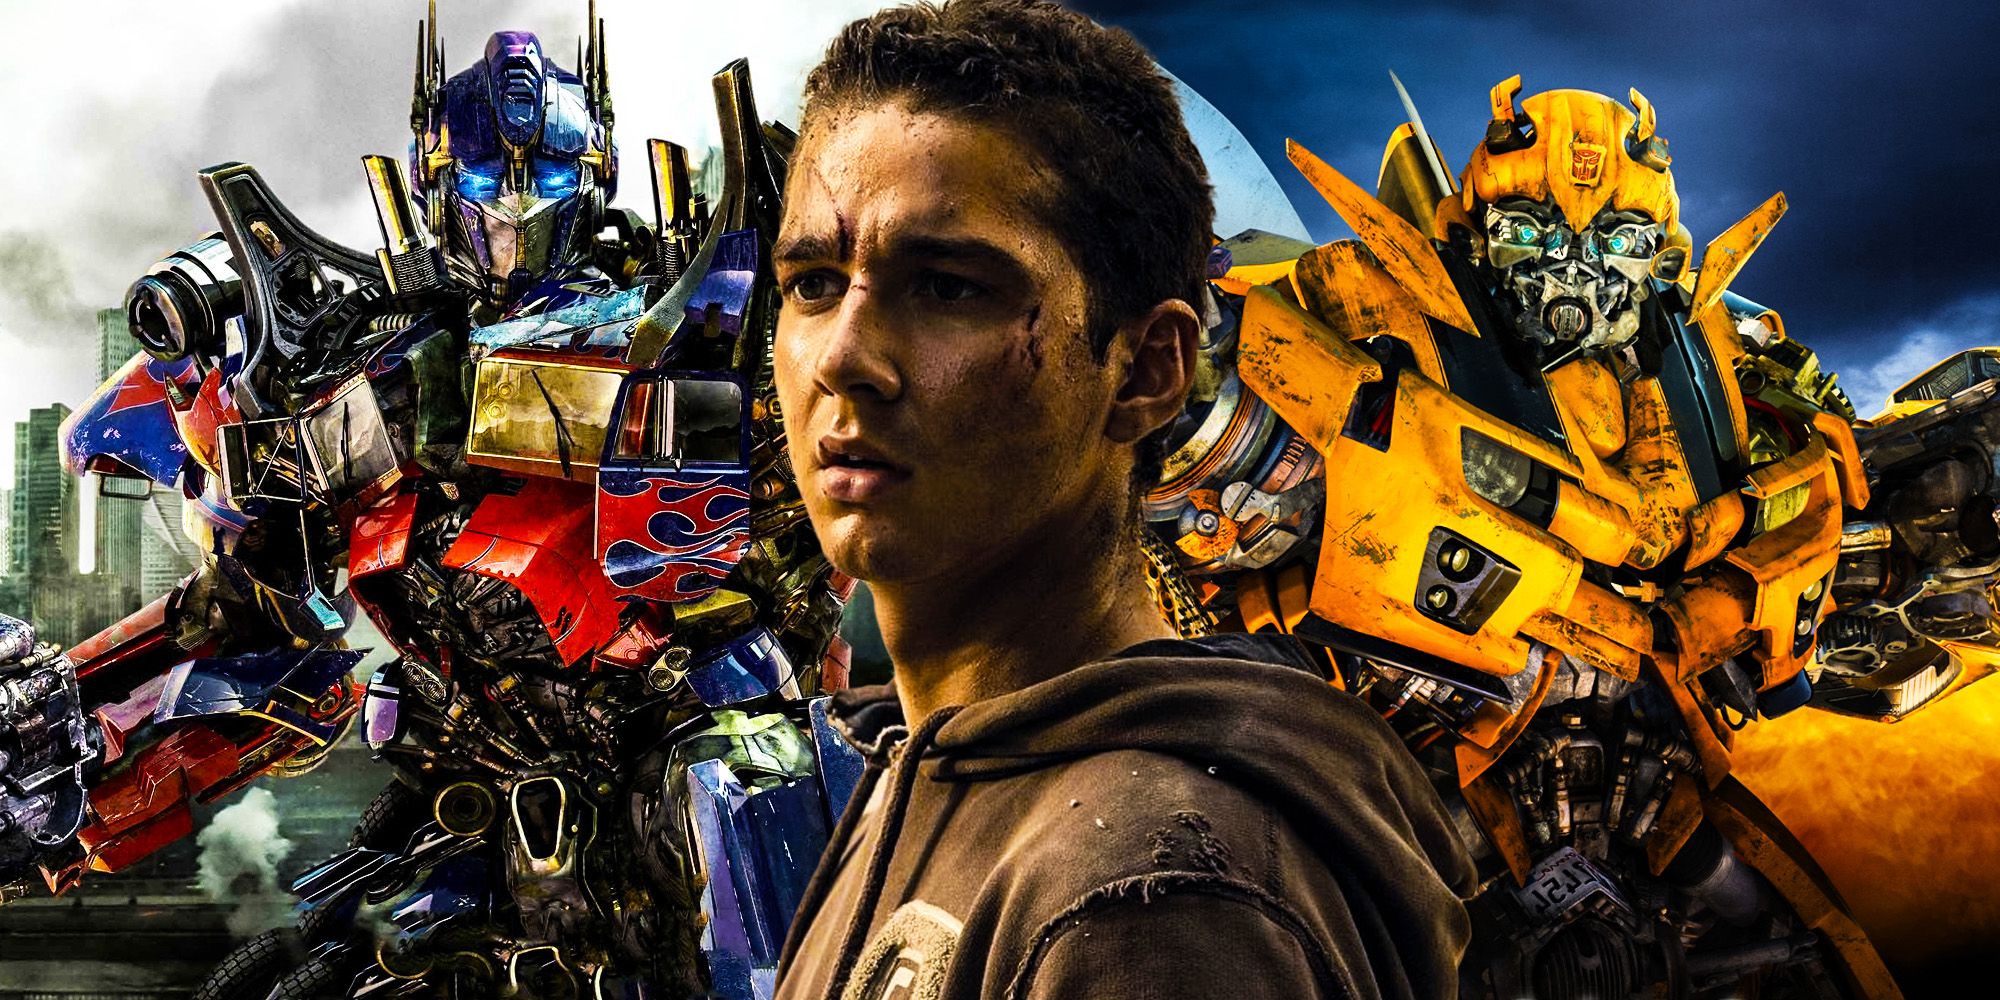 Why Michael Bay's Transformers Movies Were So Popular (Despite Being Bad)